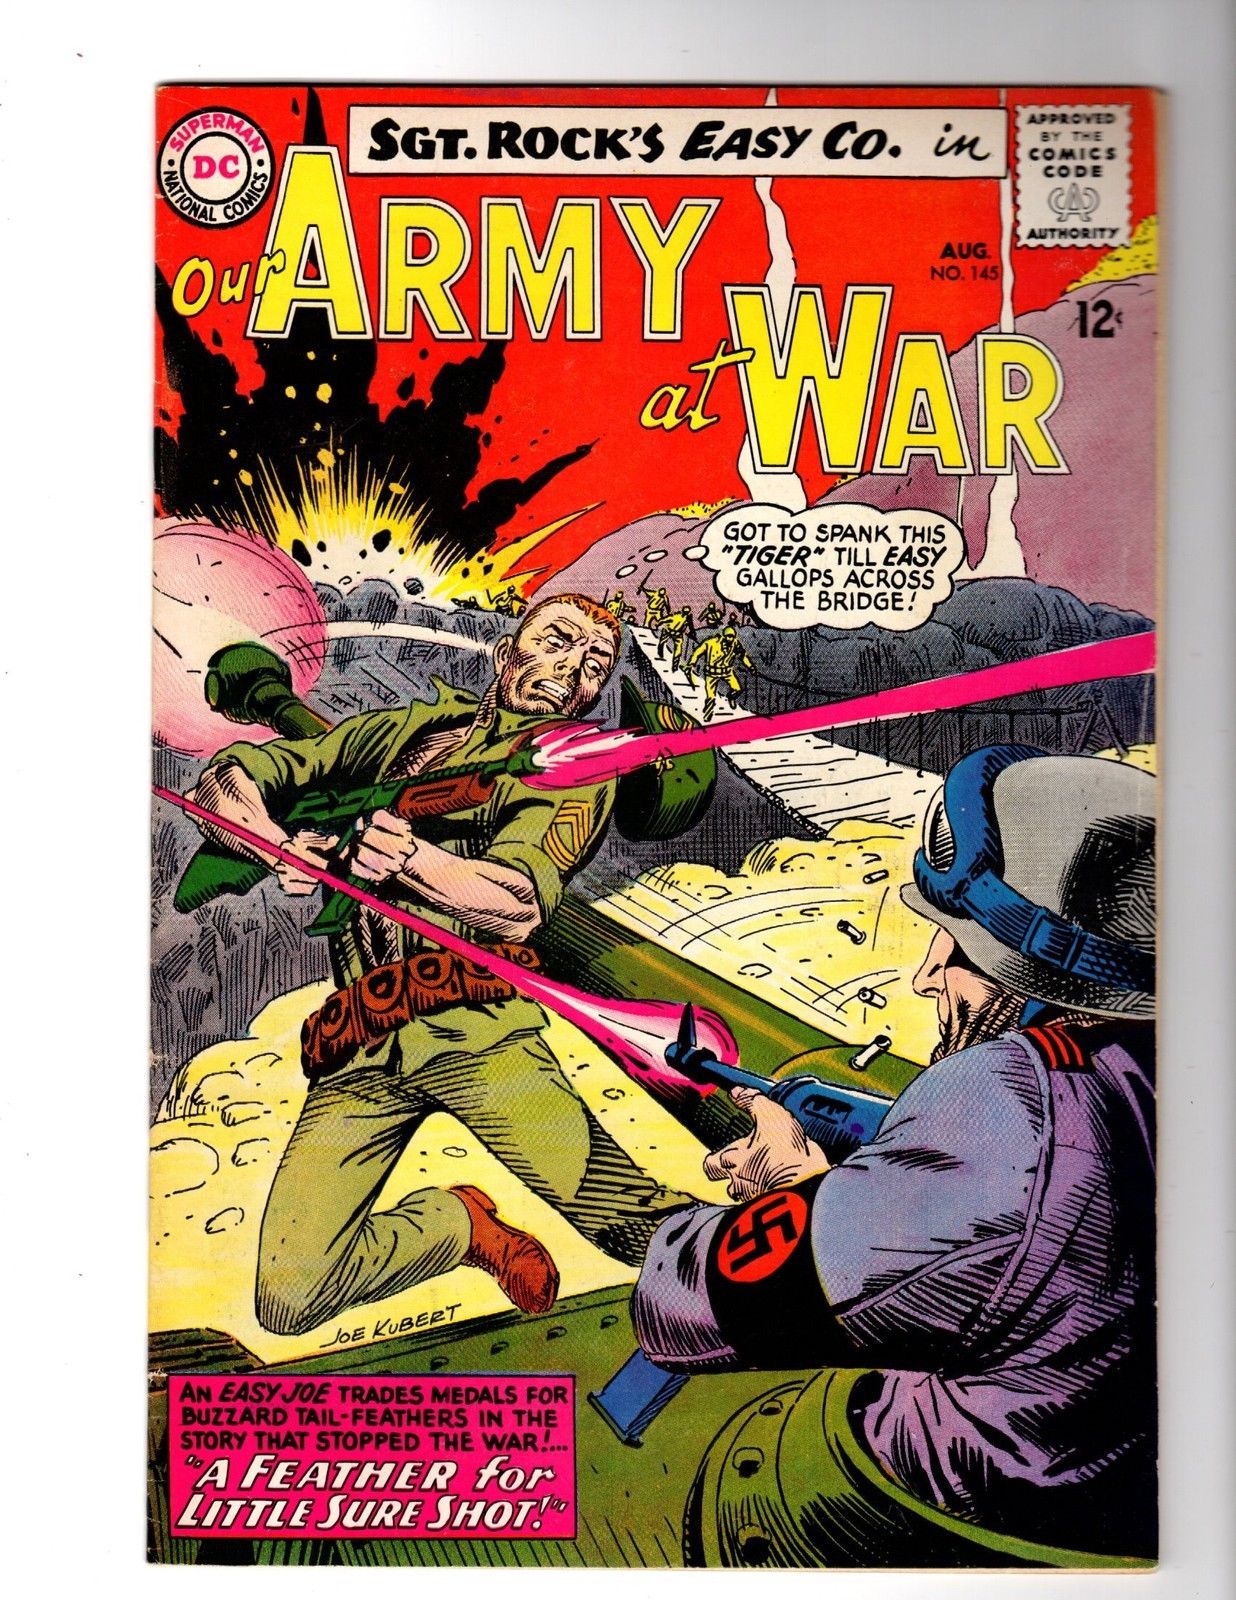 Our Army at War #145 (Aug 1964, DC) | eBay